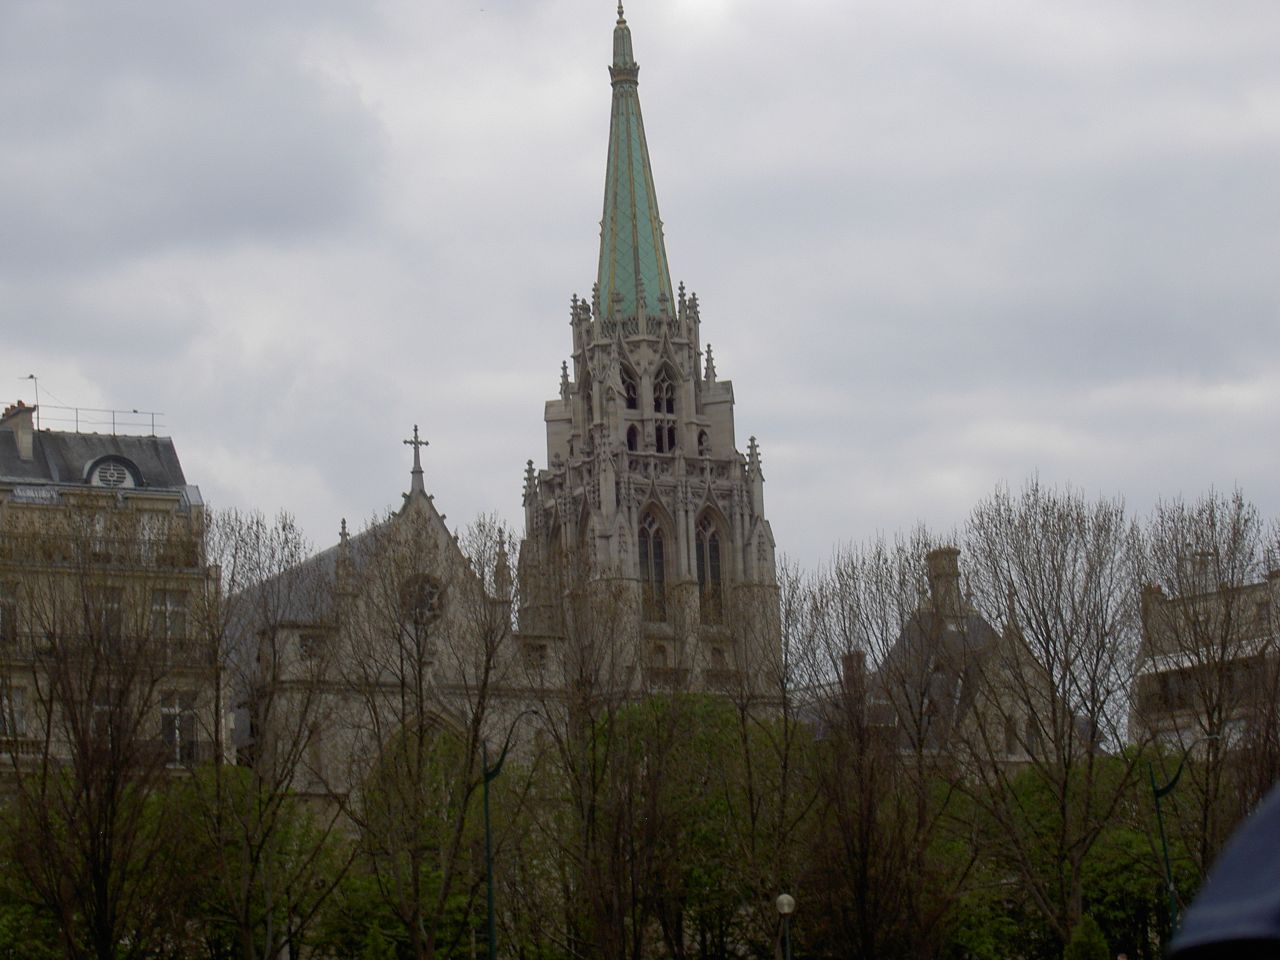 large cathedral towering over several other tall buildings